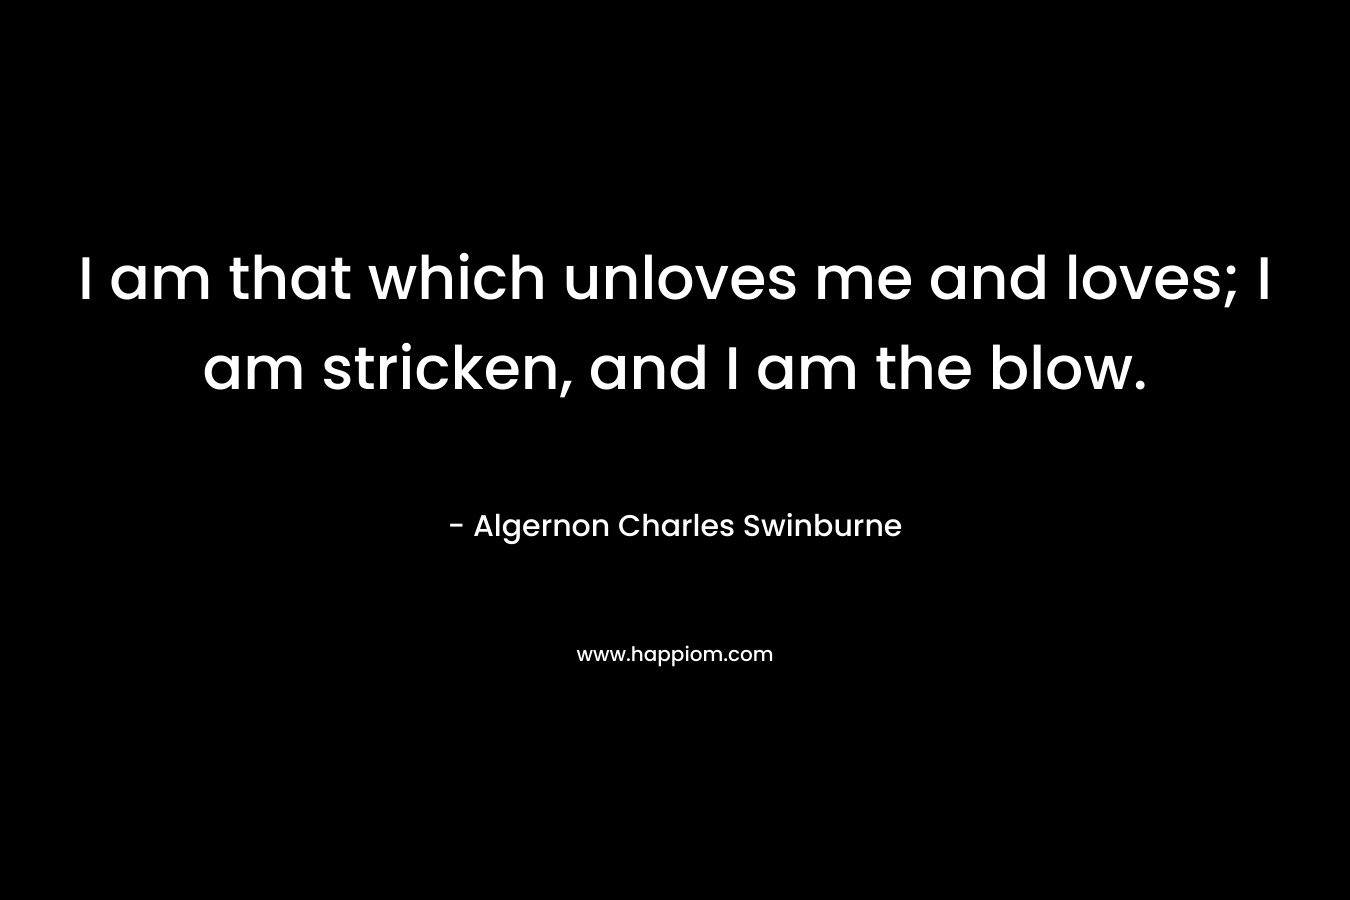 I am that which unloves me and loves; I am stricken, and I am the blow.